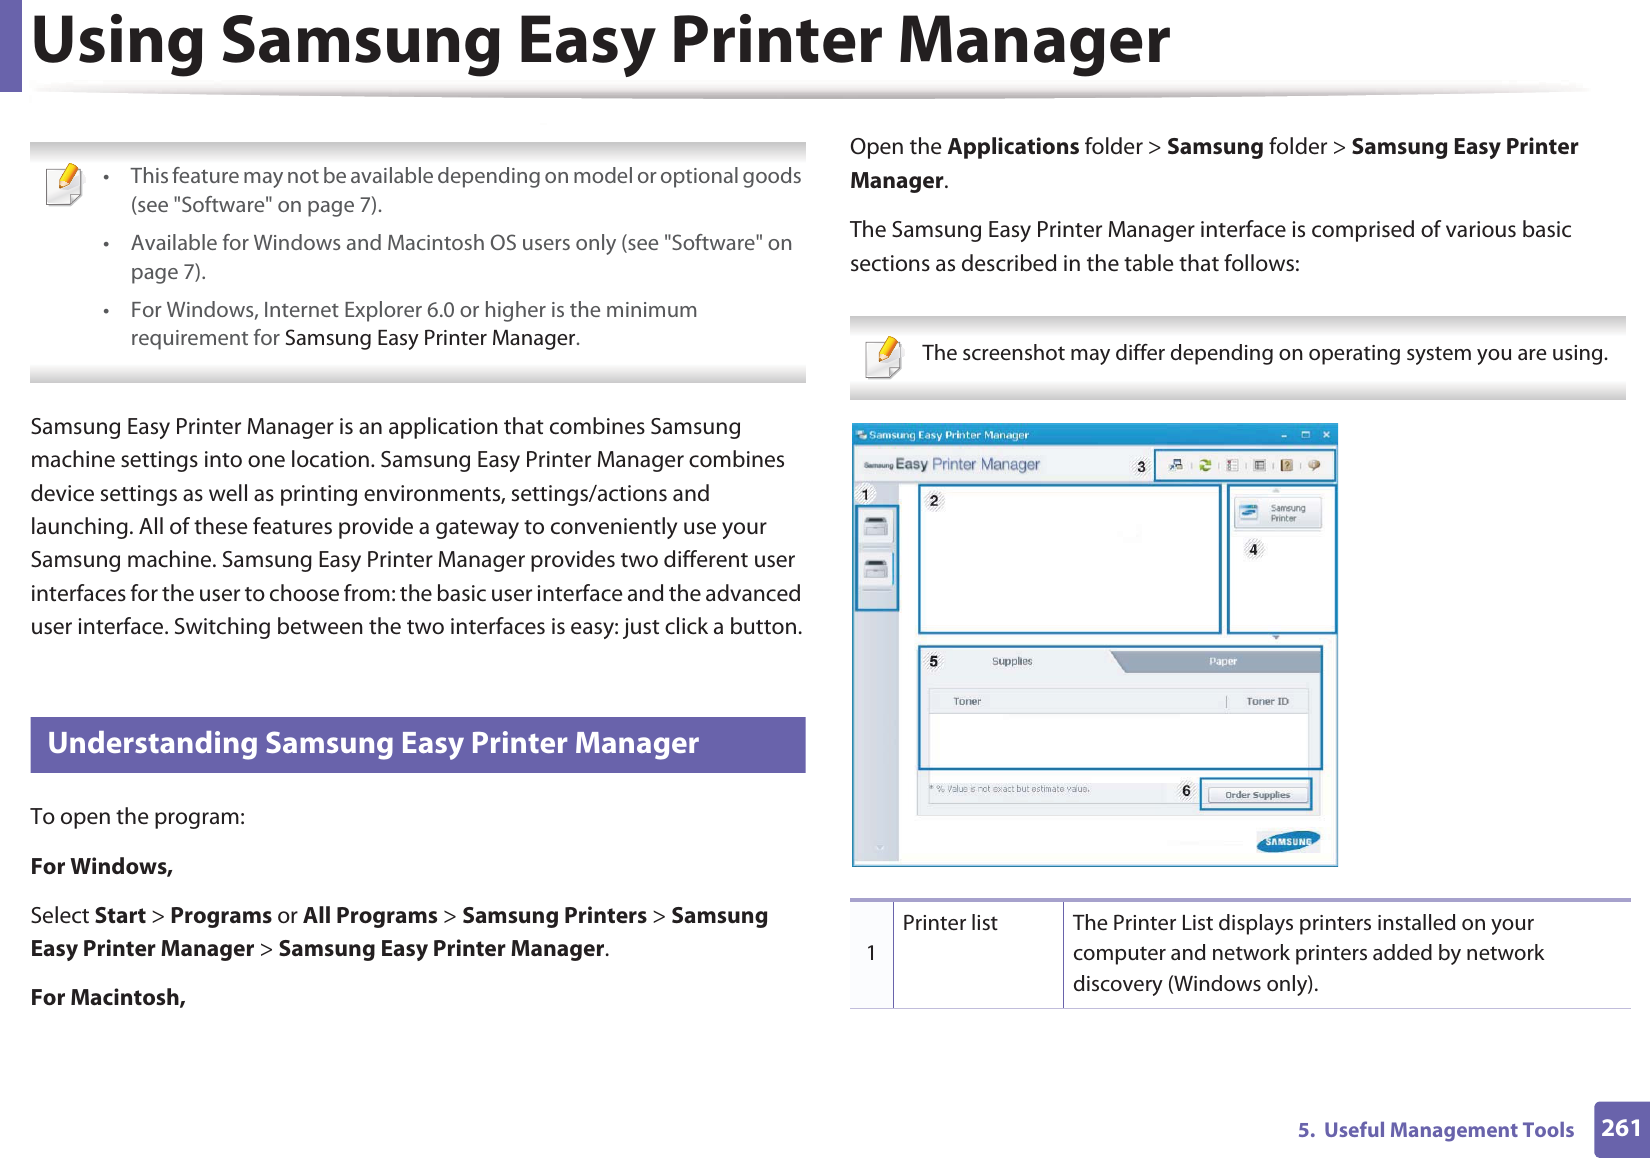 2615.  Useful Management ToolsUsing Samsung Easy Printer Manager  • This feature may not be available depending on model or optional goods (see &quot;Software&quot; on page 7).• Available for Windows and Macintosh OS users only (see &quot;Software&quot; on page 7).• For Windows, Internet Explorer 6.0 or higher is the minimum requirement for Samsung Easy Printer Manager. Samsung Easy Printer Manager is an application that combines Samsung machine settings into one location. Samsung Easy Printer Manager combines device settings as well as printing environments, settings/actions and launching. All of these features provide a gateway to conveniently use your Samsung machine. Samsung Easy Printer Manager provides two different user interfaces for the user to choose from: the basic user interface and the advanced user interface. Switching between the two interfaces is easy: just click a button.4 Understanding Samsung Easy Printer ManagerTo open the program: For Windows,Select Start &gt; Programs or All Programs &gt; Samsung Printers &gt; Samsung Easy Printer Manager &gt; Samsung Easy Printer Manager.For Macintosh,Open the Applications folder &gt; Samsung folder &gt; Samsung Easy Printer Manager.The Samsung Easy Printer Manager interface is comprised of various basic sections as described in the table that follows: The screenshot may differ depending on operating system you are using. 1Printer list The Printer List displays printers installed on your computer and network printers added by network discovery (Windows only).